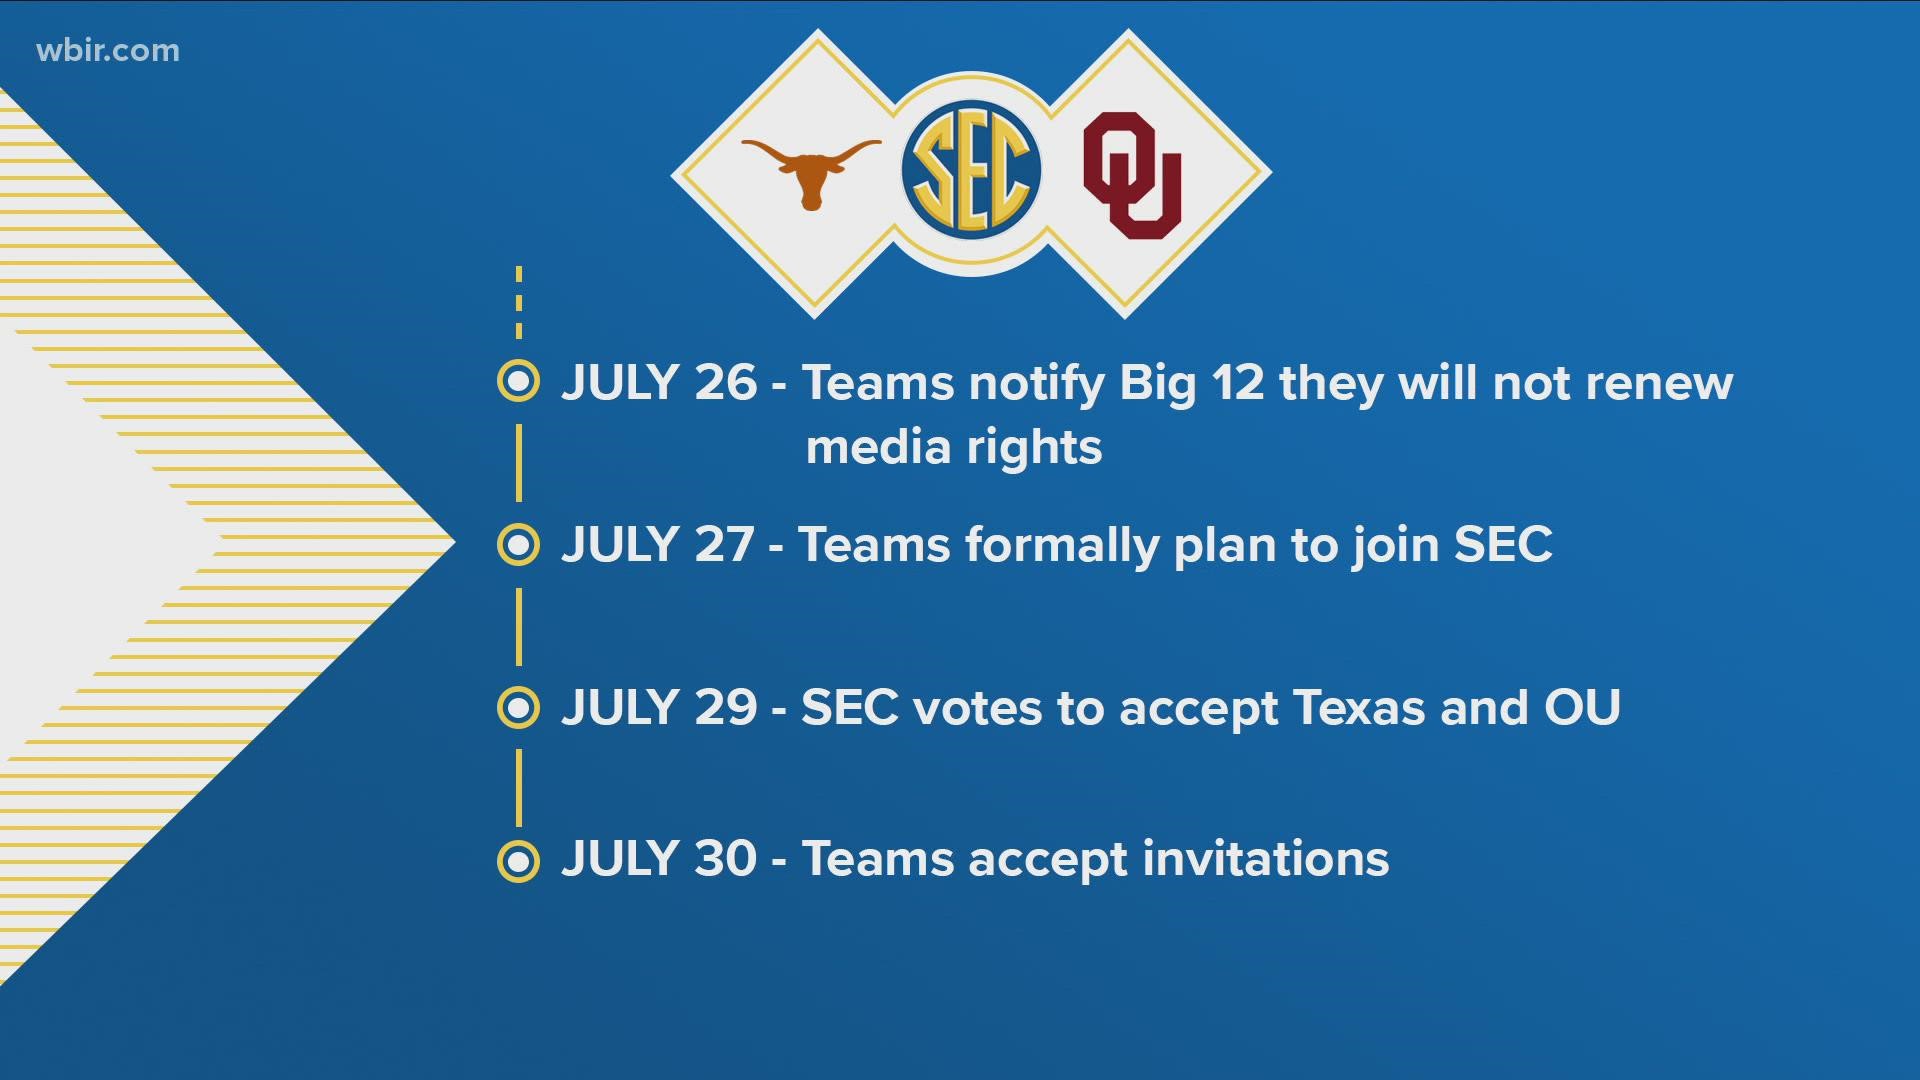 Texas and Oklahoma will join the Southeastern Conference as the 15th and 16th members effective July 1, 2025.